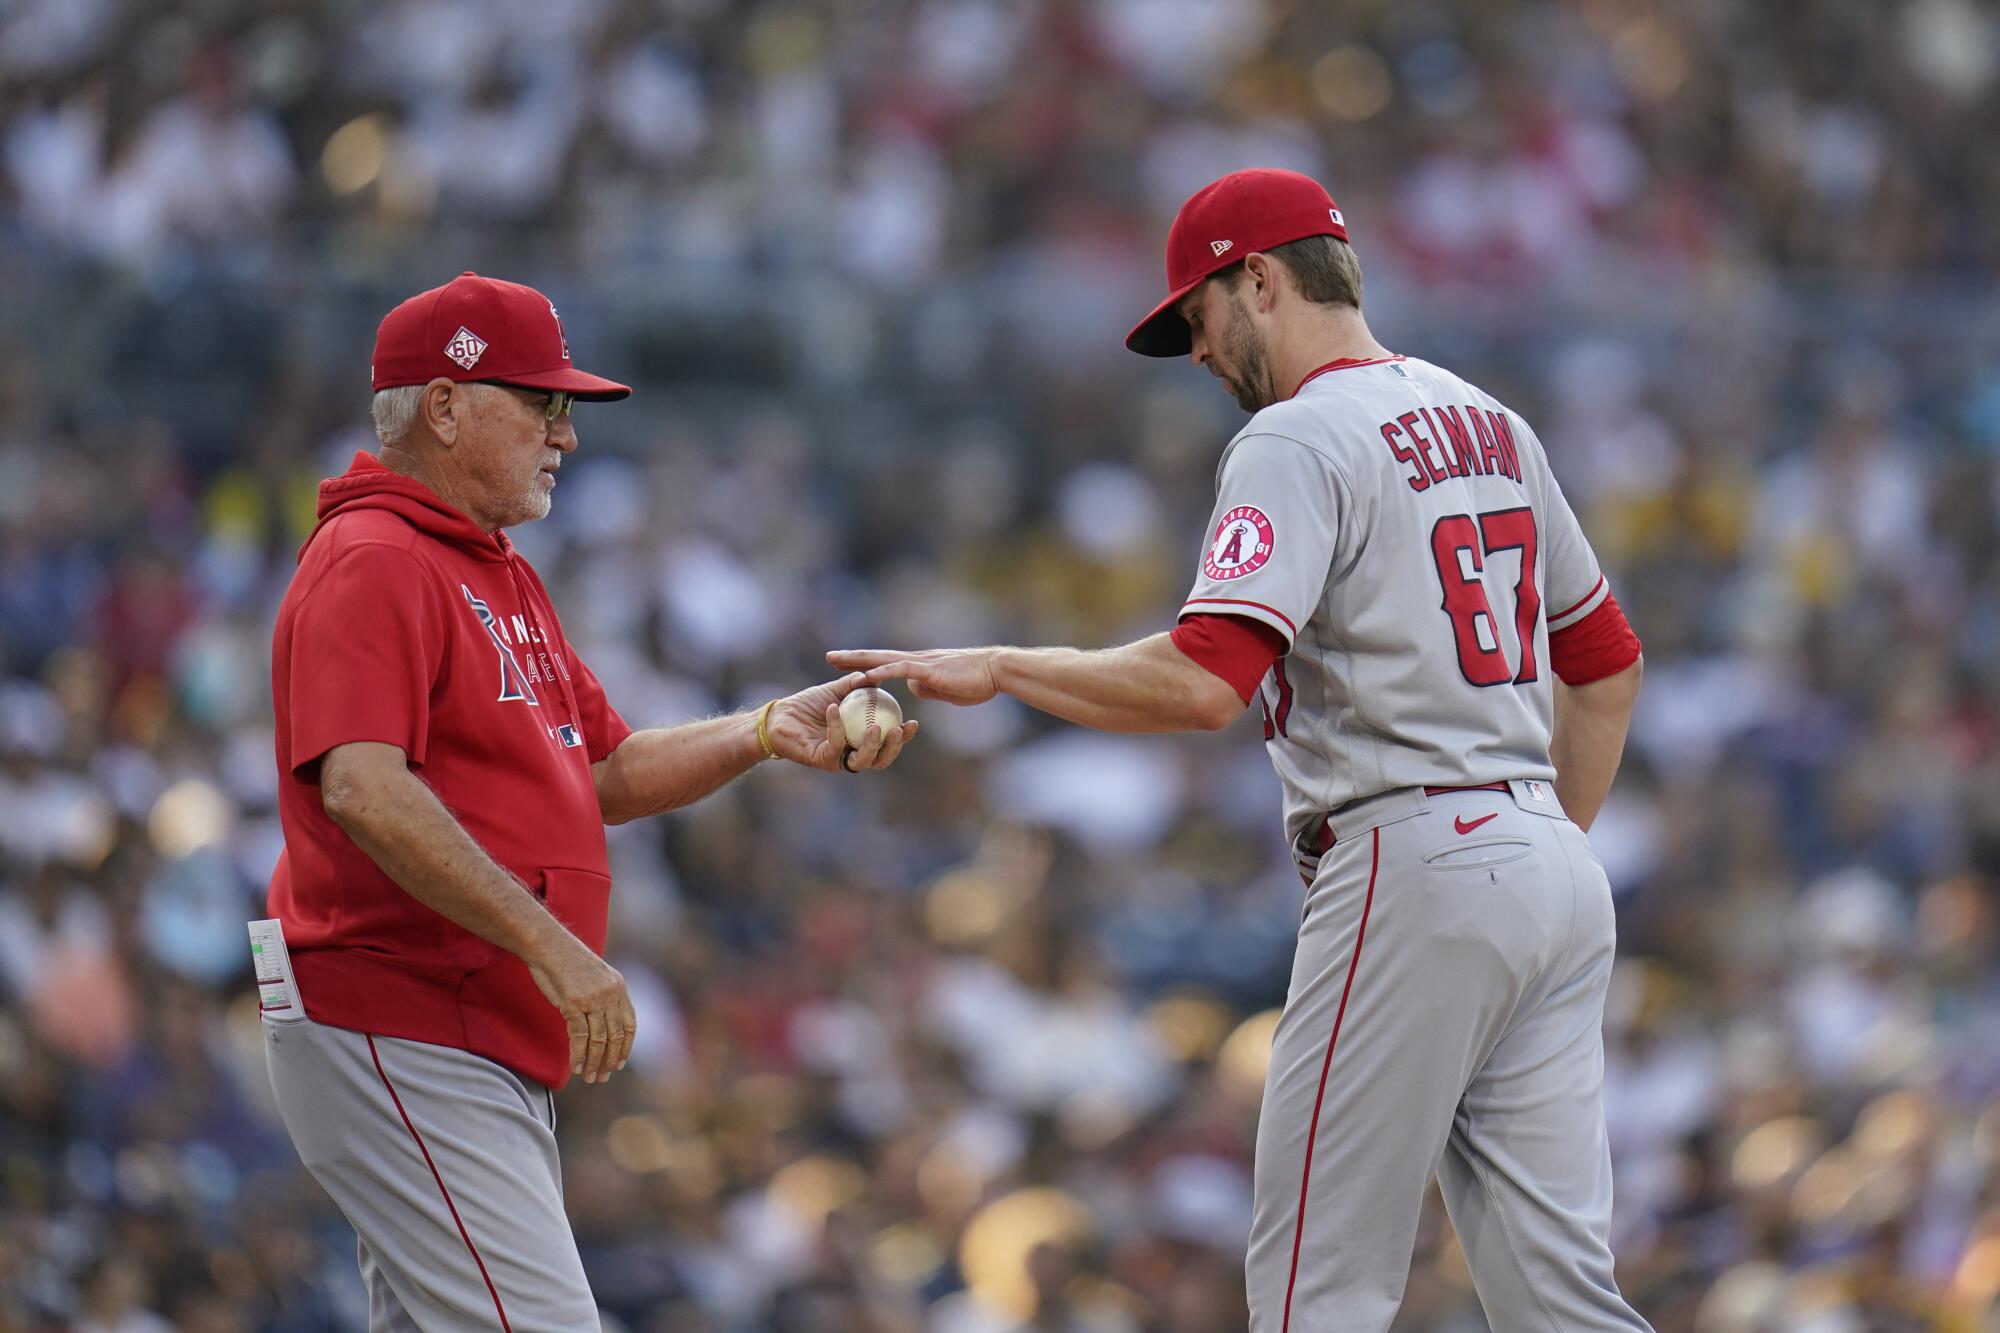 The Angels gave up eight runs in the second inning Wednesday in a loss to the Padres. (AP Photo/Gregory Bull)